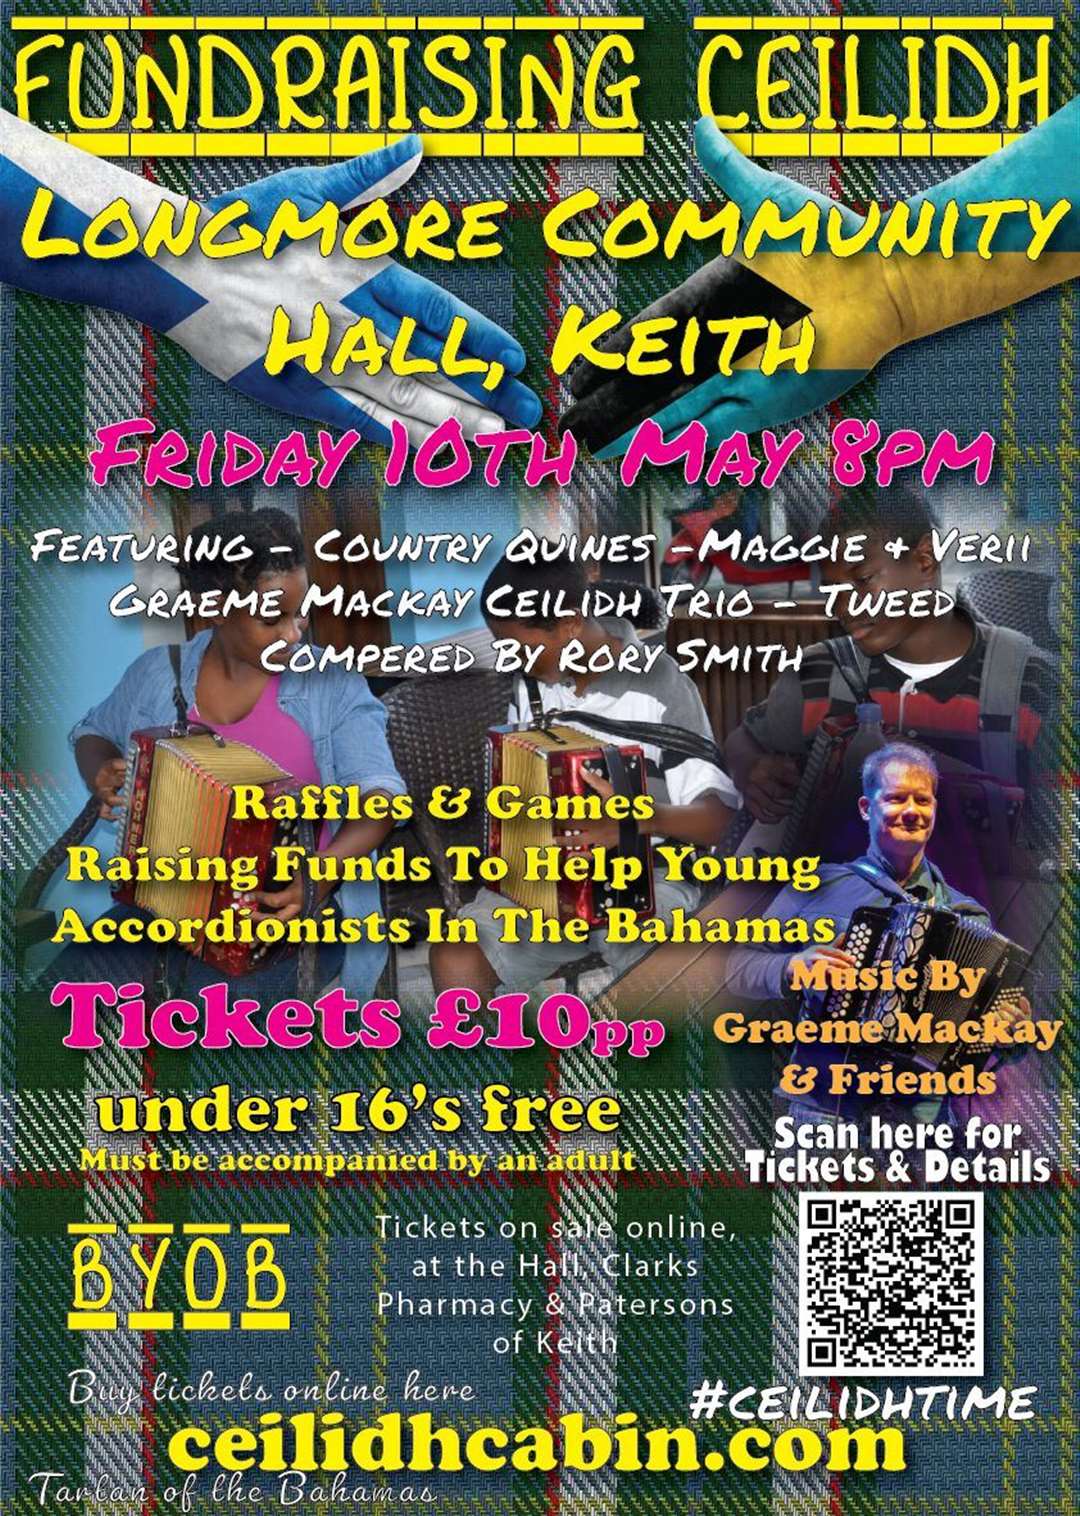 A poster for the fundraising ceilidh on May 10 in Keith.